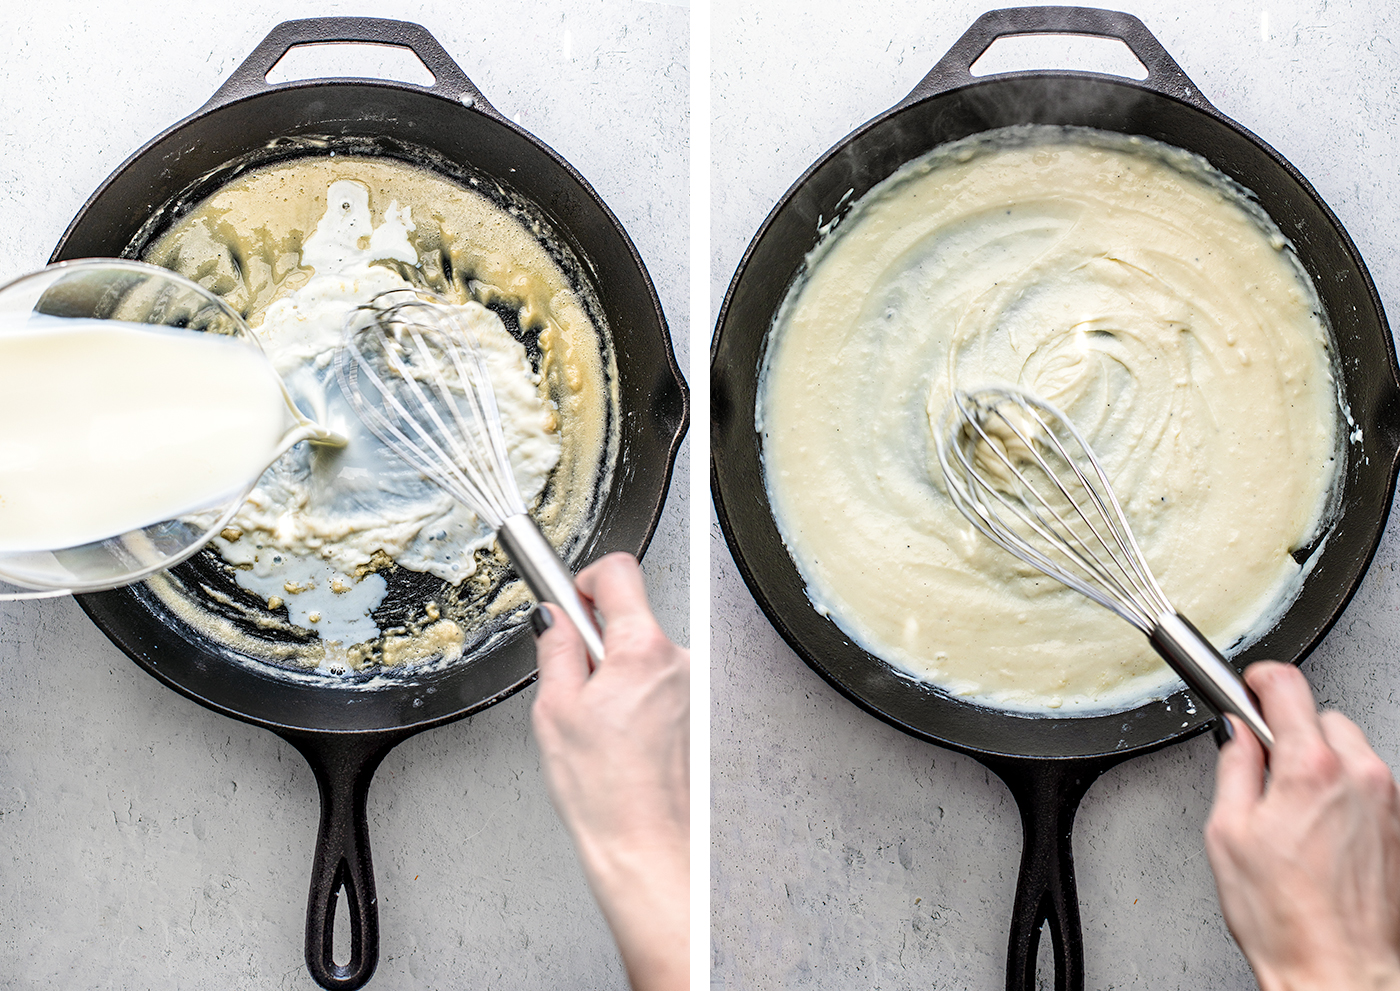 Left: Milk being whisked into the roux; Right: Whisk stirring bechamel.